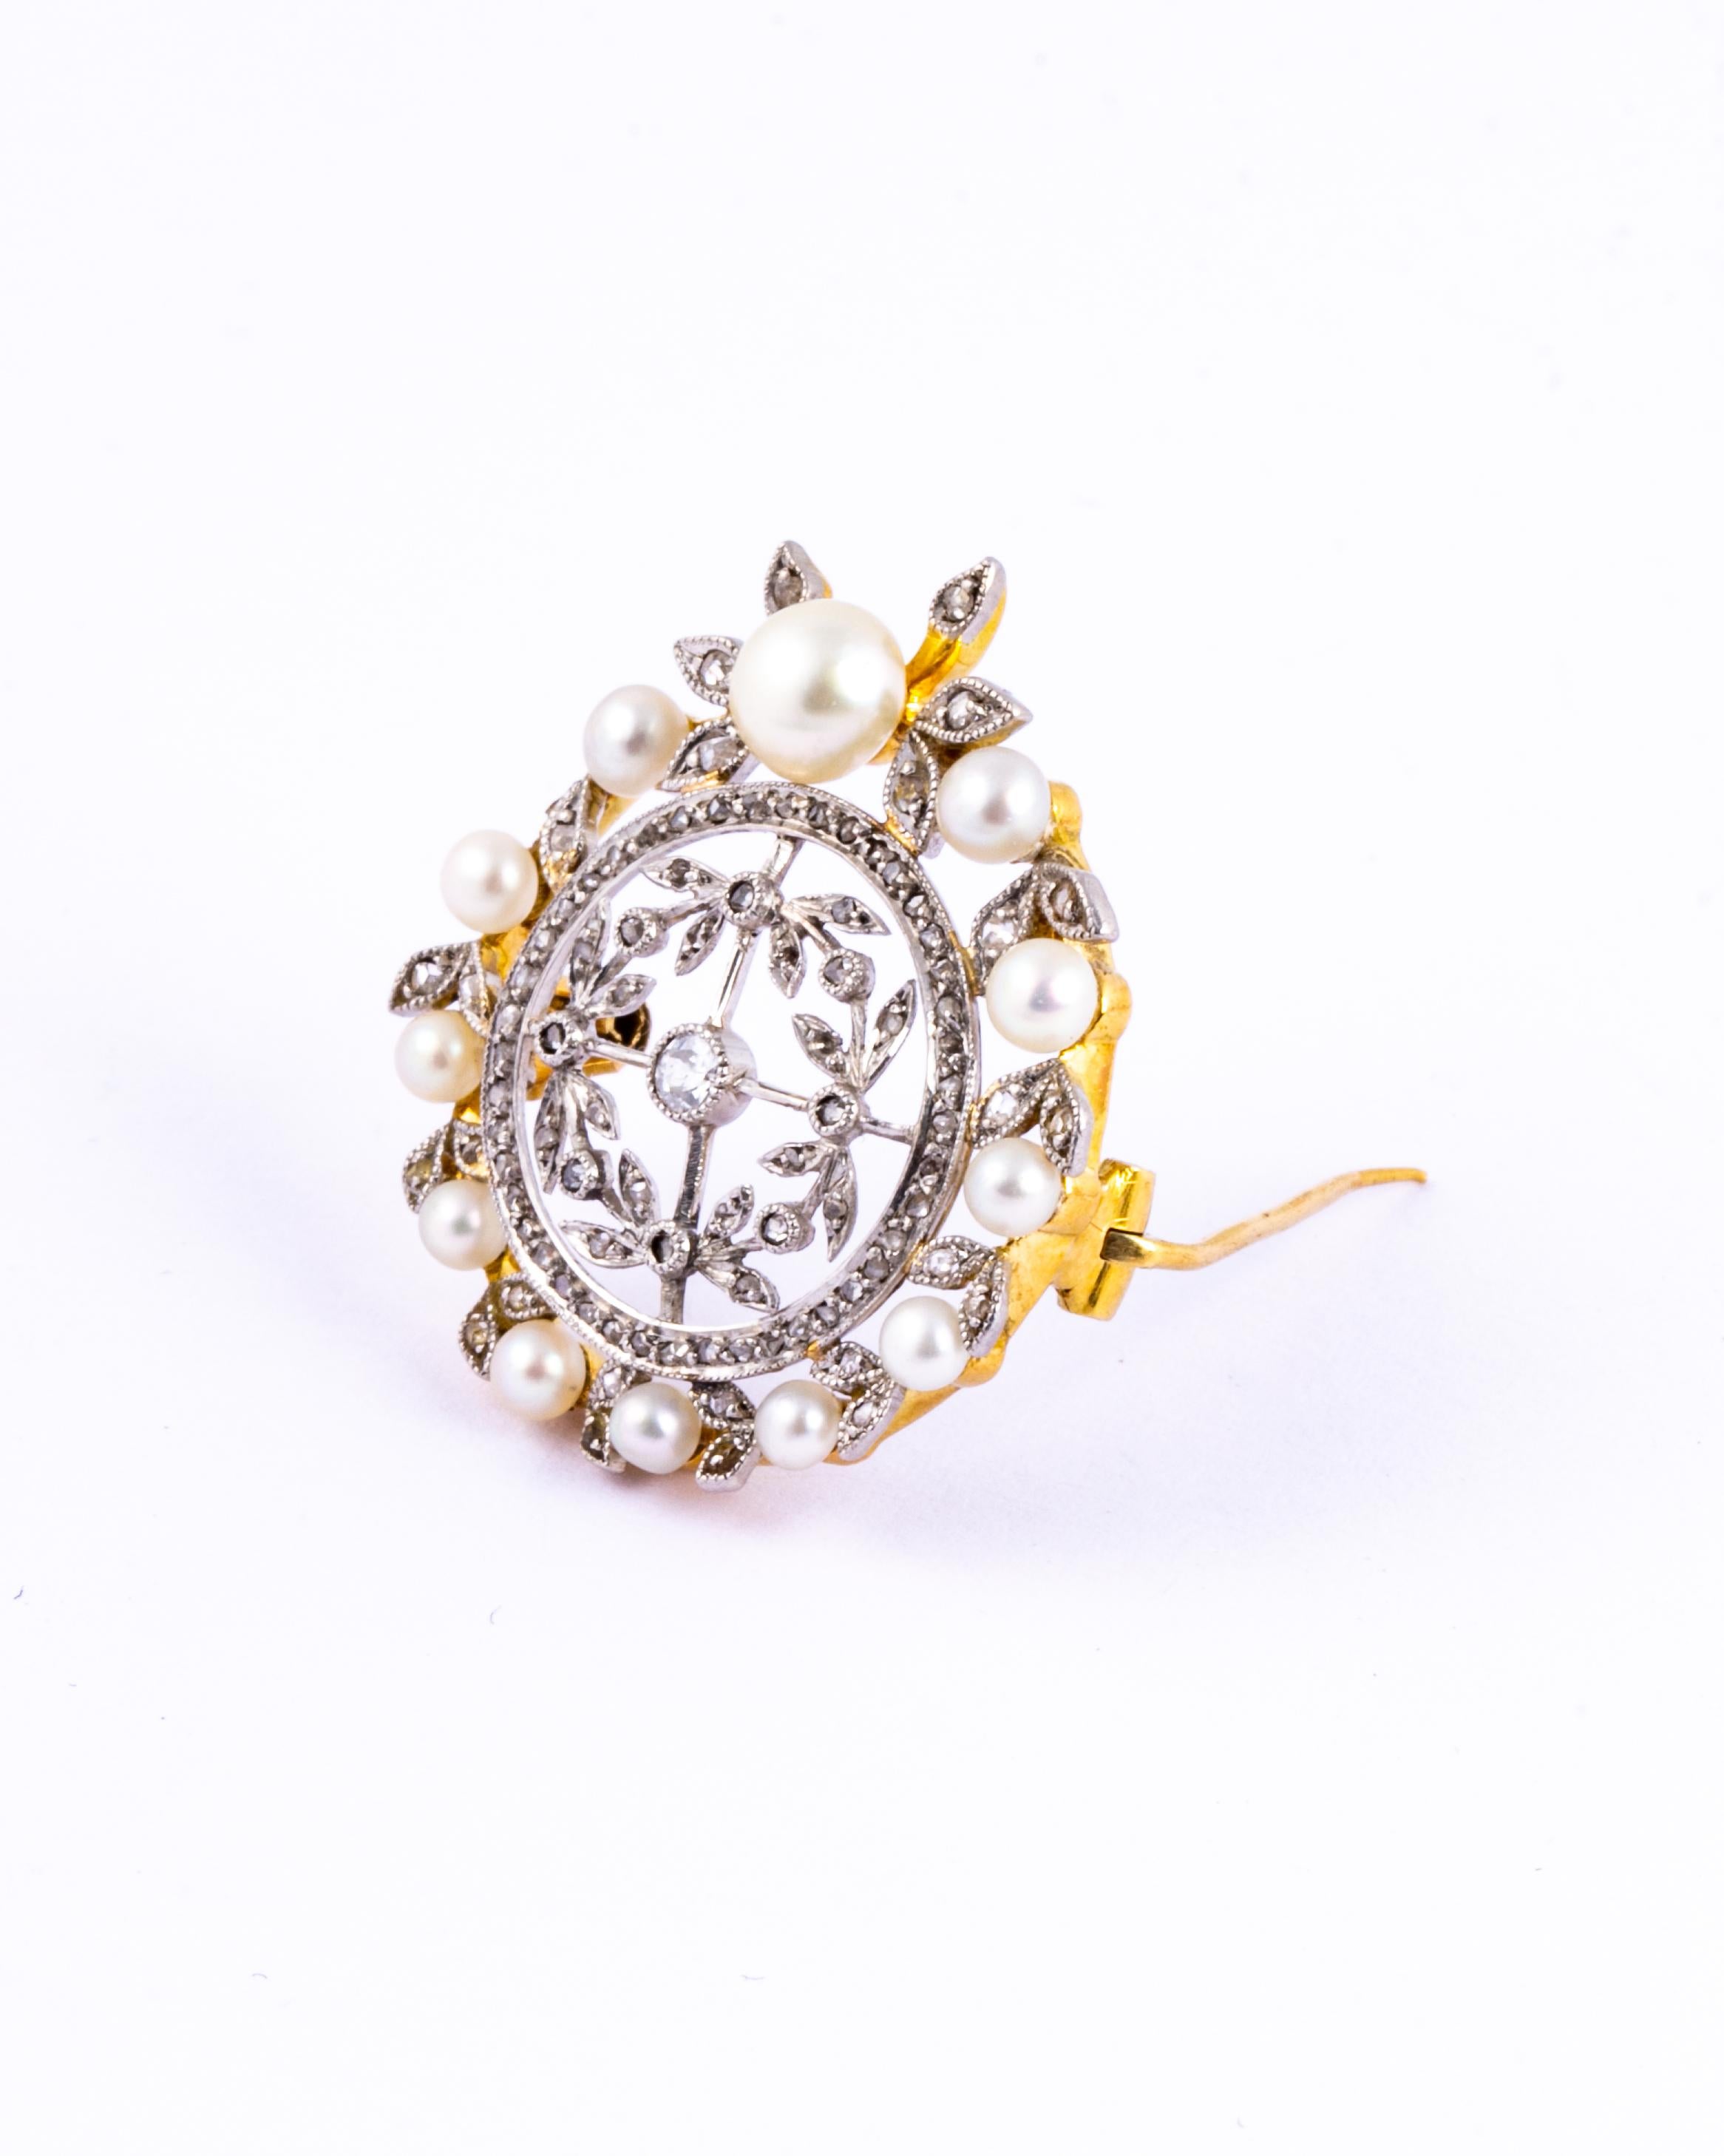 This intricate brooch holds sparkling diamonds and soft shimmery pearls. The stones are all set in platinum and the rest of the brooch is modelled in 9ct gold. The total carat weight of the diamonds is approx 50pts. 

Brooch Dimensions: 29x27mm